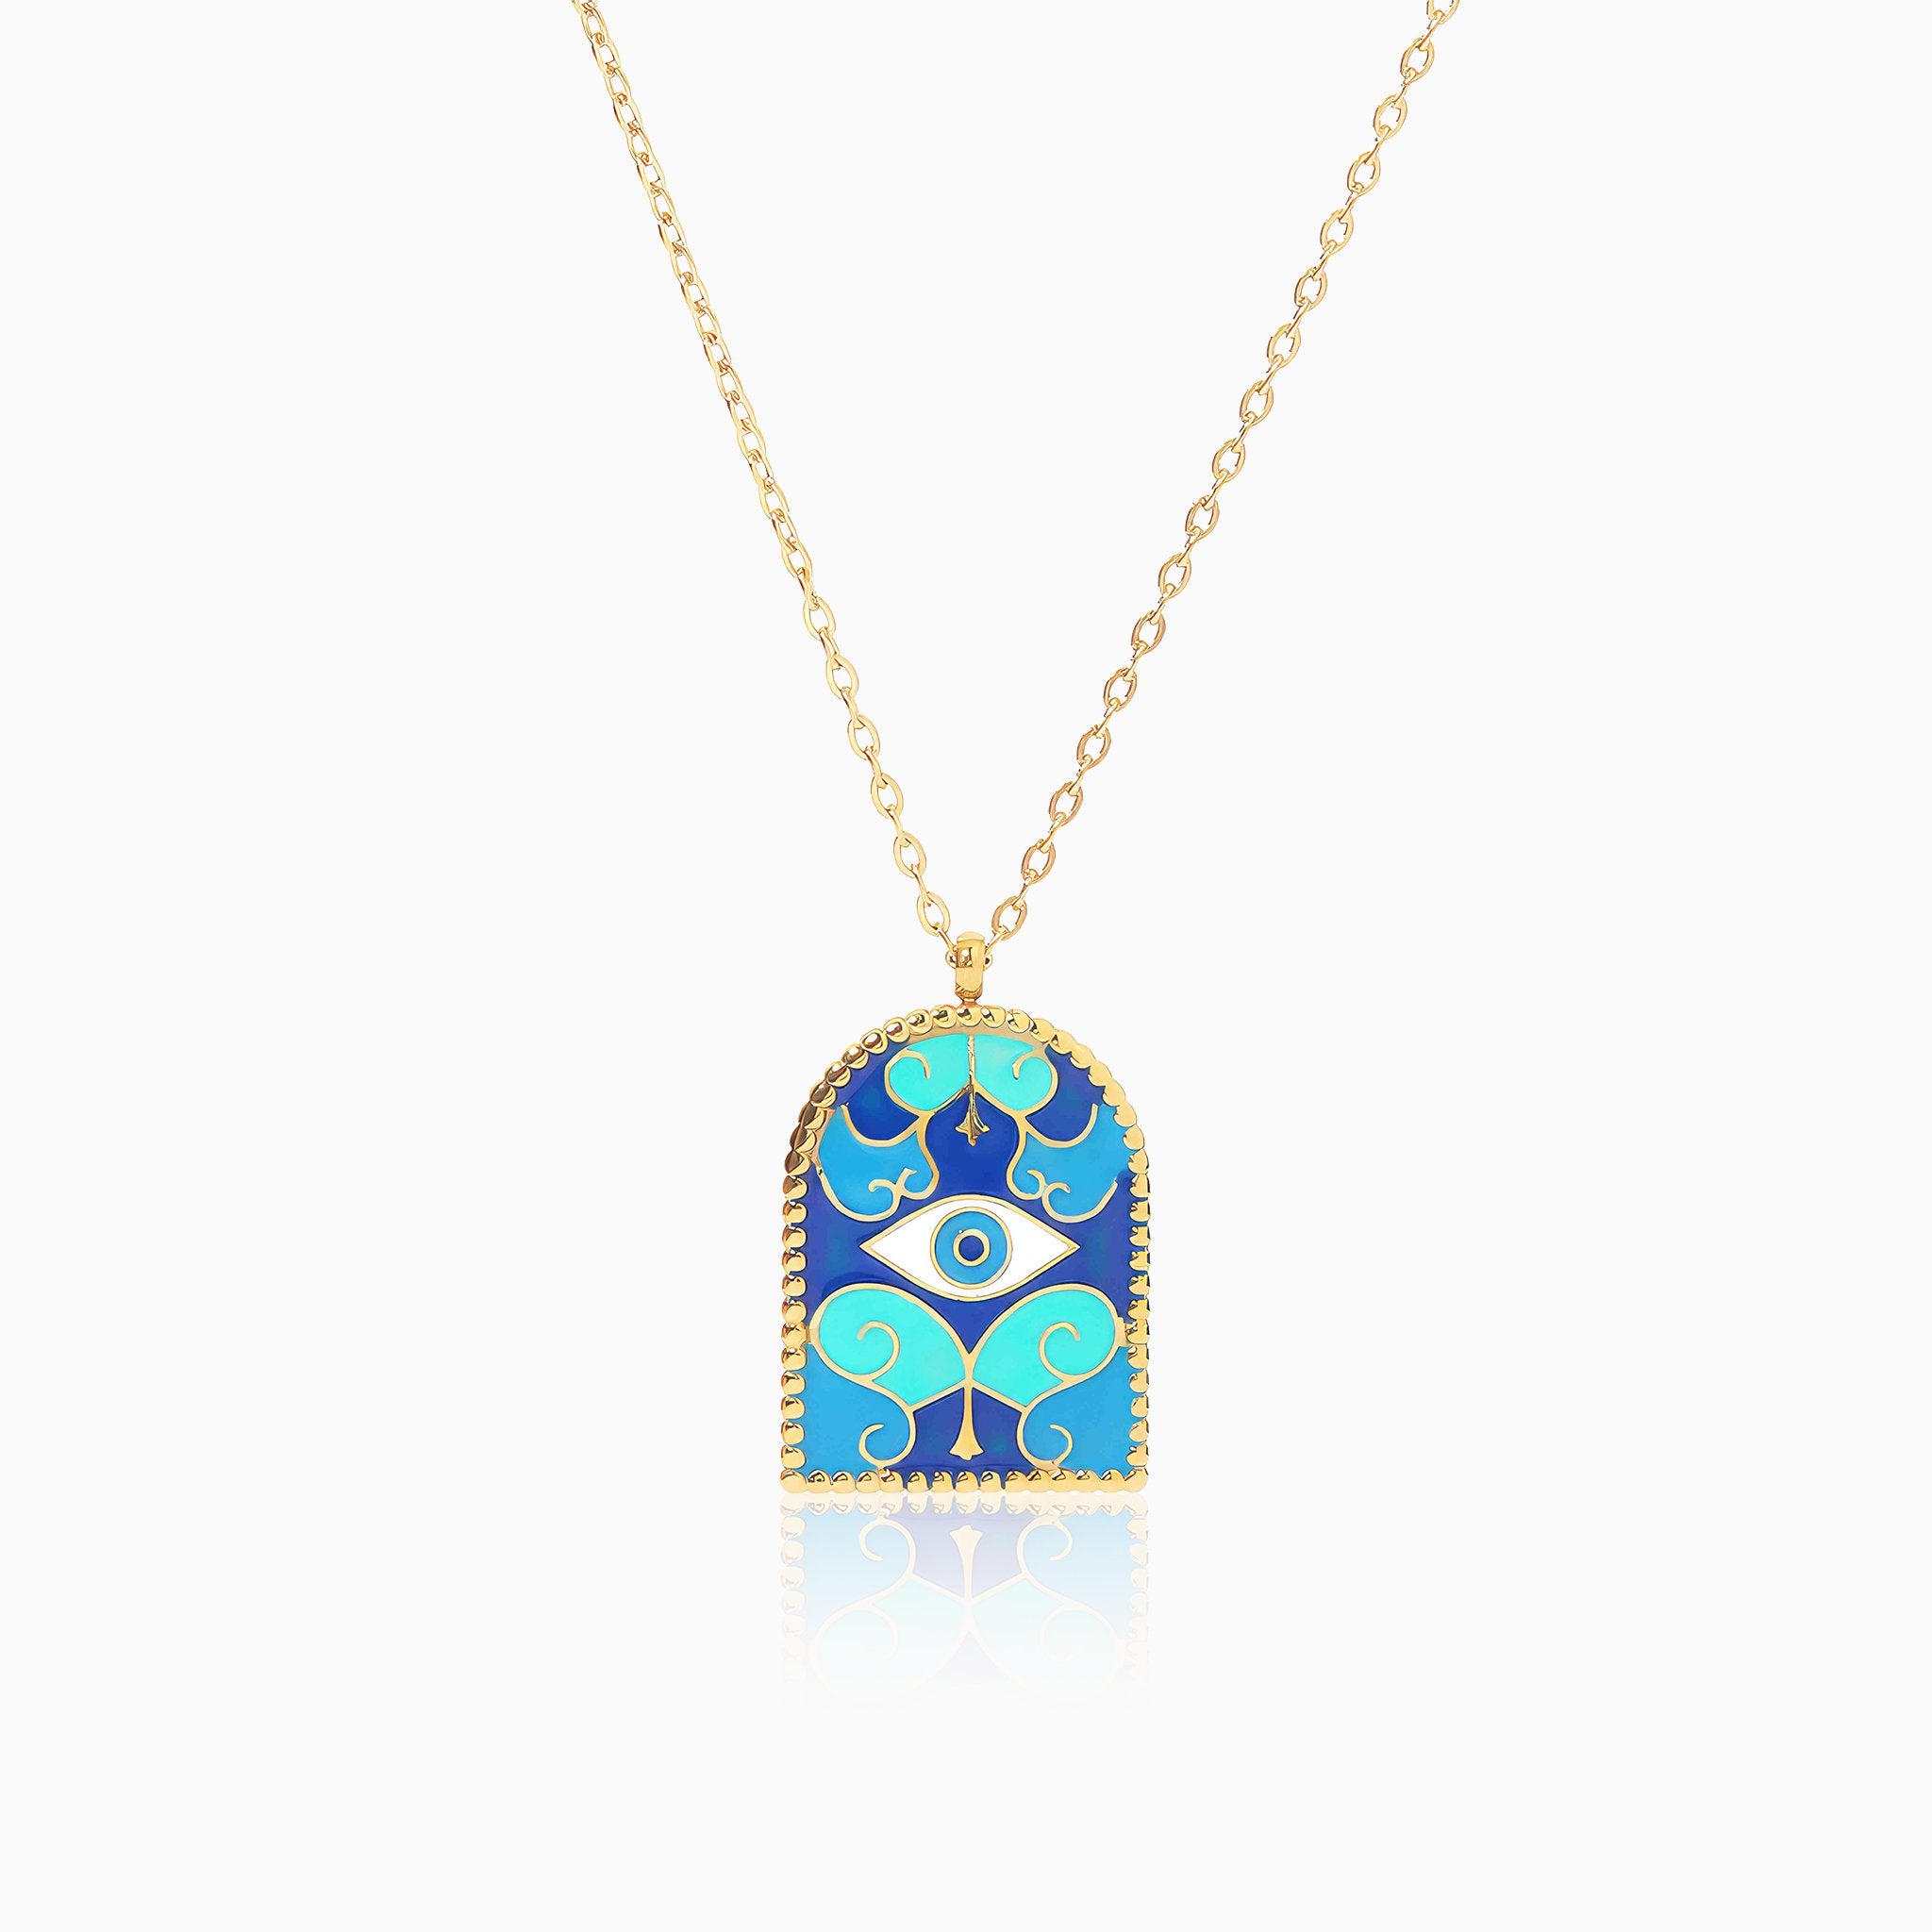 Blue Roman Arch Eye Necklace - Nobbier - Necklace - 18K Gold And Titanium PVD Coated Jewelry